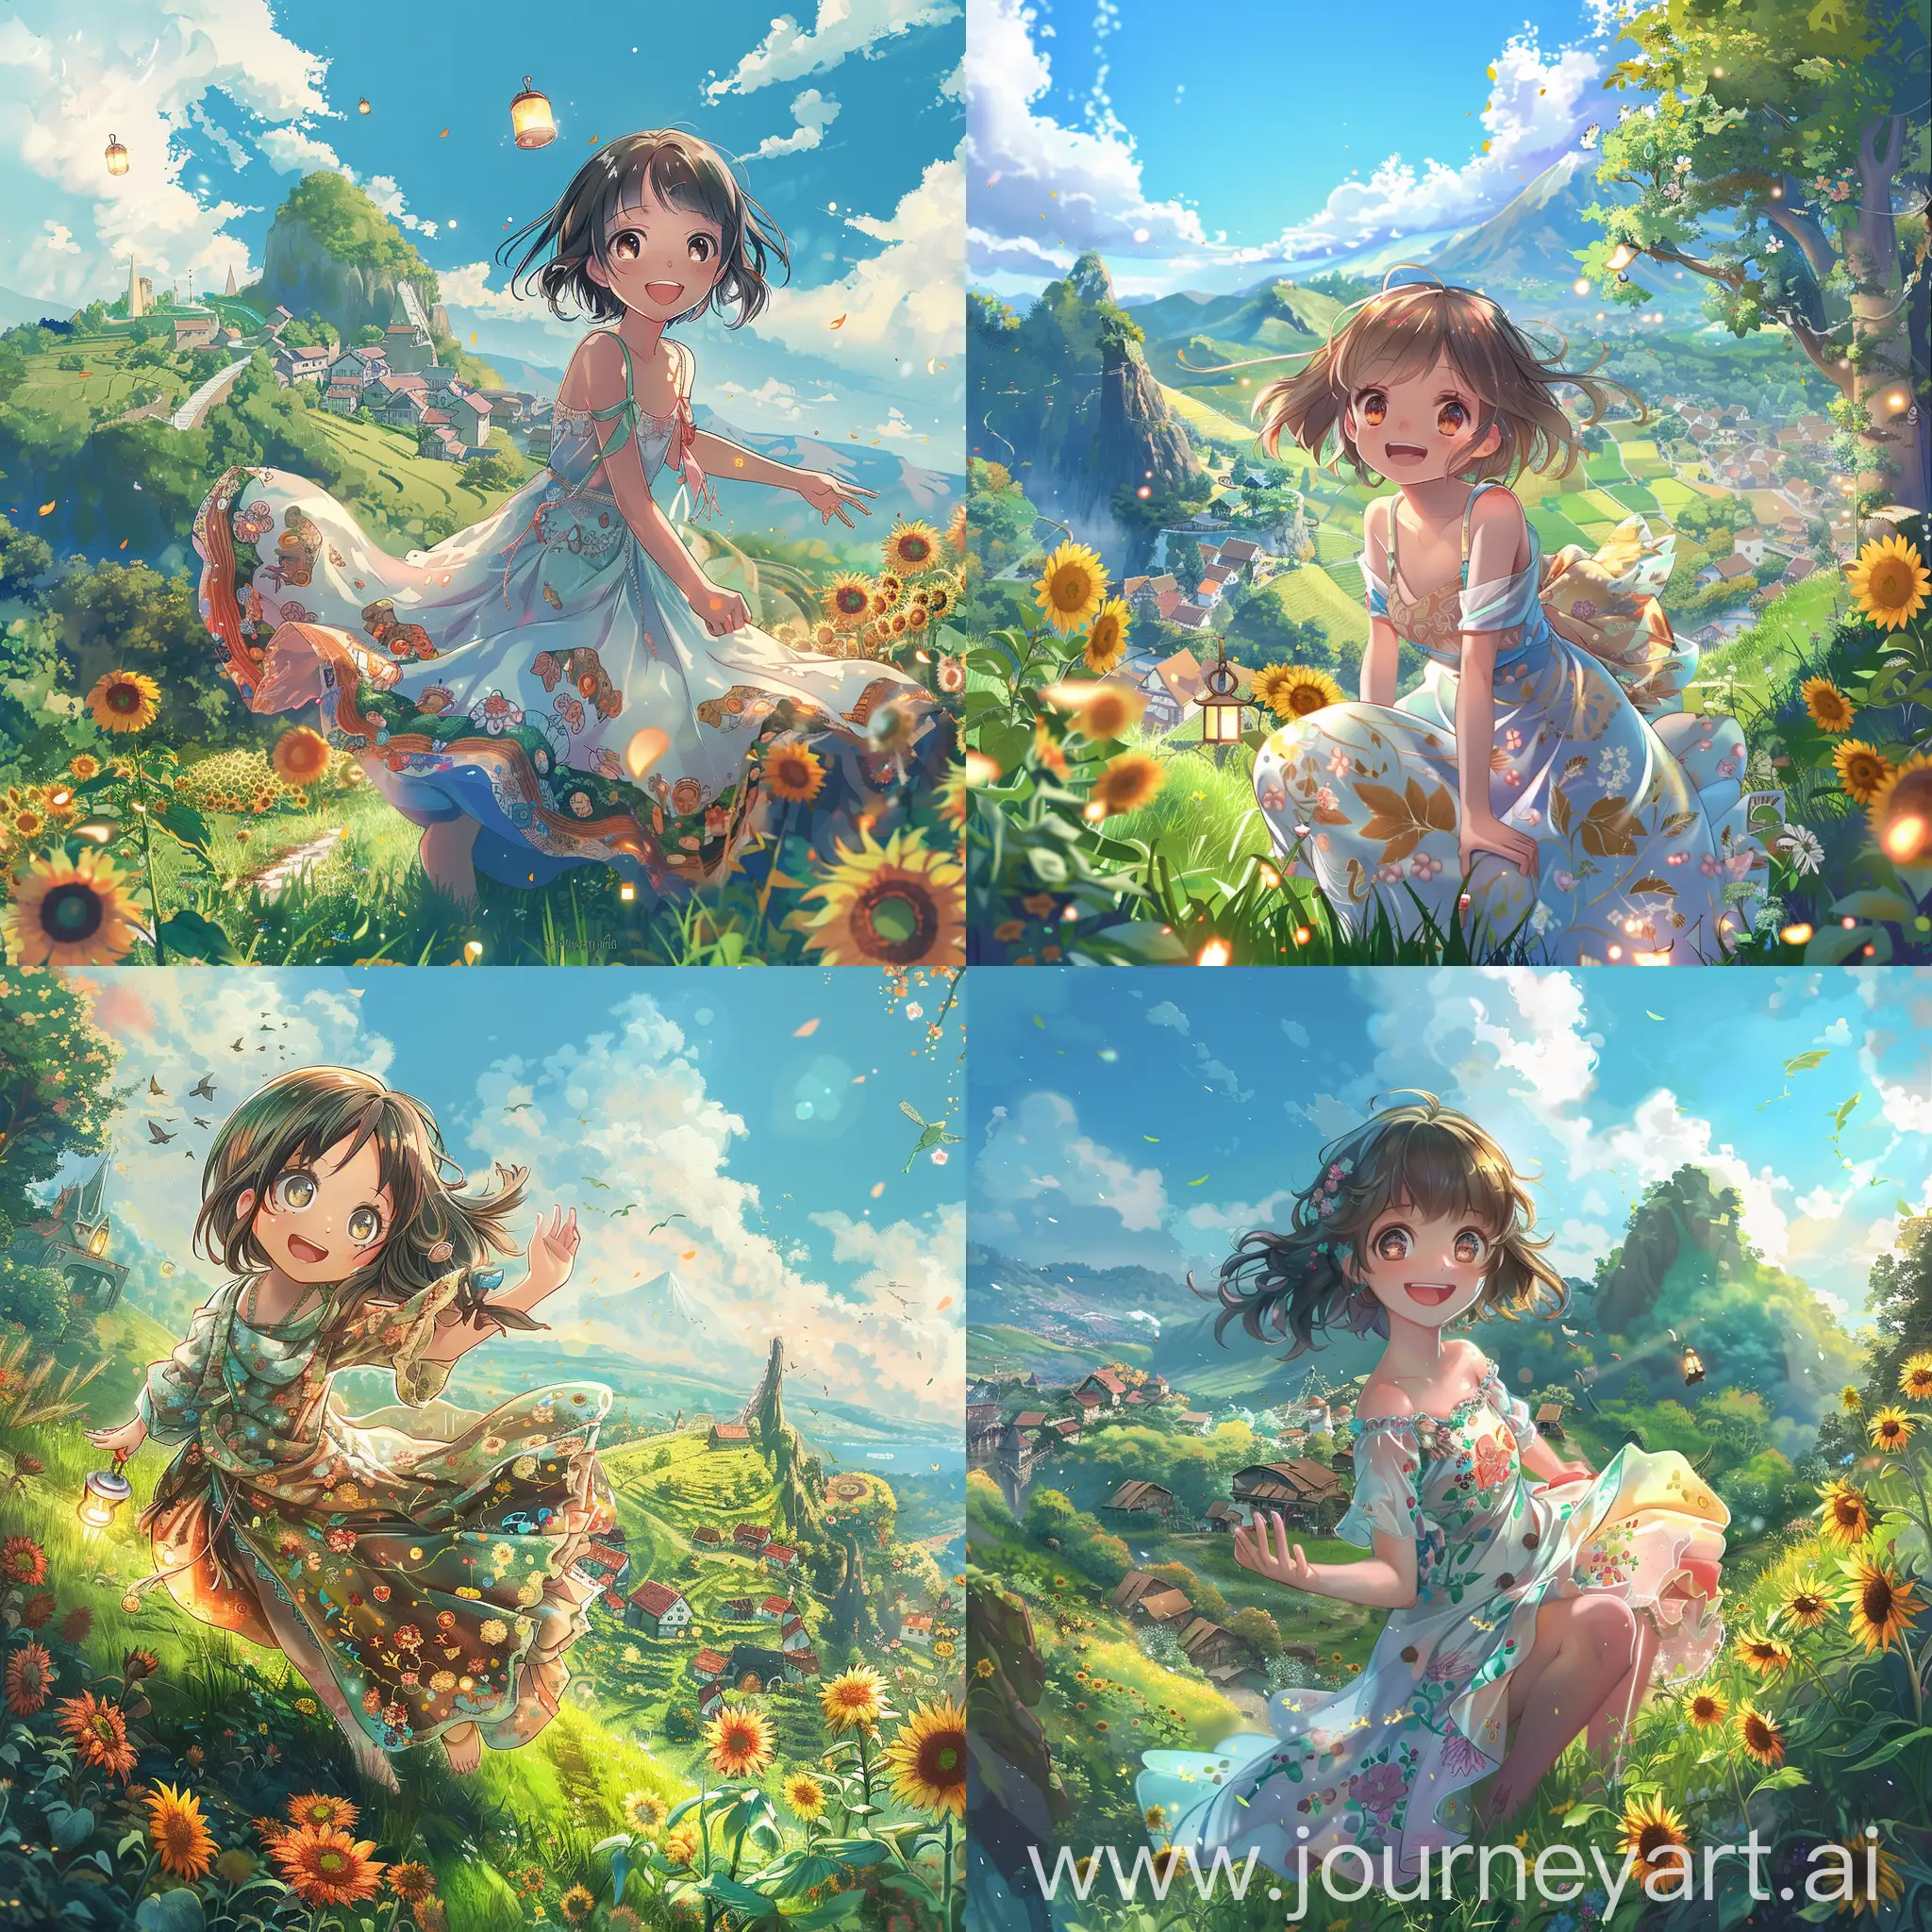 A cute anime girl with big sparkling eyes, wearing a flowing dress with floral patterns, standing in a lush garden filled with colorful flowers and whimsical creatures. The style is reminiscent of Studio Ghibli, with a dreamy and magical atmosphere. The image is an illustration.\",\"A young anime girl with a gentle smile, holding a lantern in one hand, surrounded by a mysterious forest filled with glowing spirits and ancient trees. The scene captures the enchanting and heartwarming essence of Studio Ghibli films. The image is an illustration.\",\"An anime girl sitting on a grassy hill, looking up at the sky as a soft breeze plays with her hair and dress. Behind her, a scenic landscape with rolling hills, a clear blue sky, and fluffy clouds. The illustration is in the style of Studio Ghibli, evoking a sense of wonder and adventure.\",\"A playful anime girl running through a field of sunflowers, her laughter almost audible. The background features a quaint village and a majestic mountain in the distance. The image is an illustration, inspired by the iconic and whimsical style of Studio Ghibli